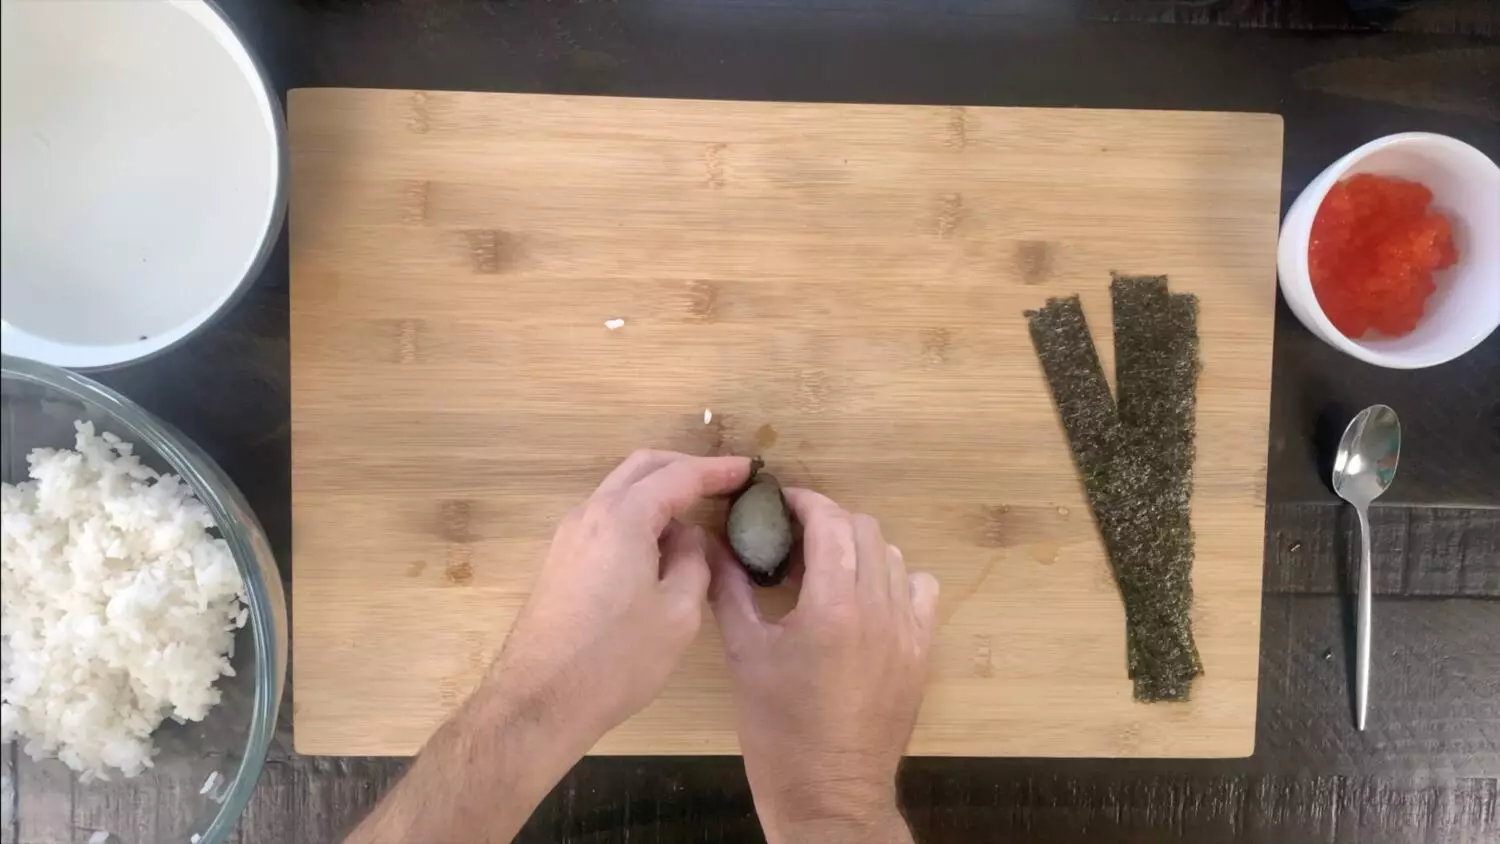 Wrapping the nori sheet around the ball of rice